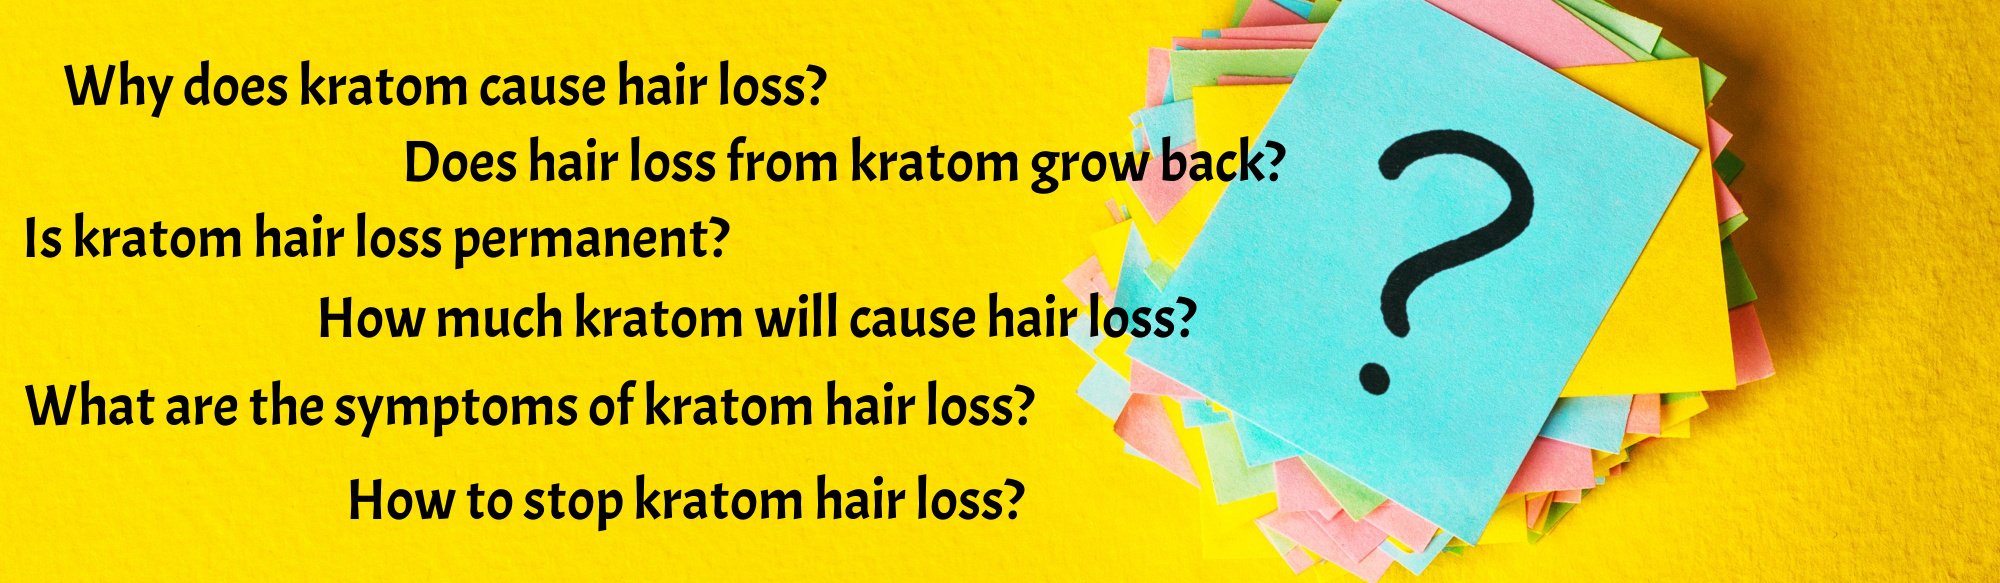 image of frequently asked questions about kratom hair loss